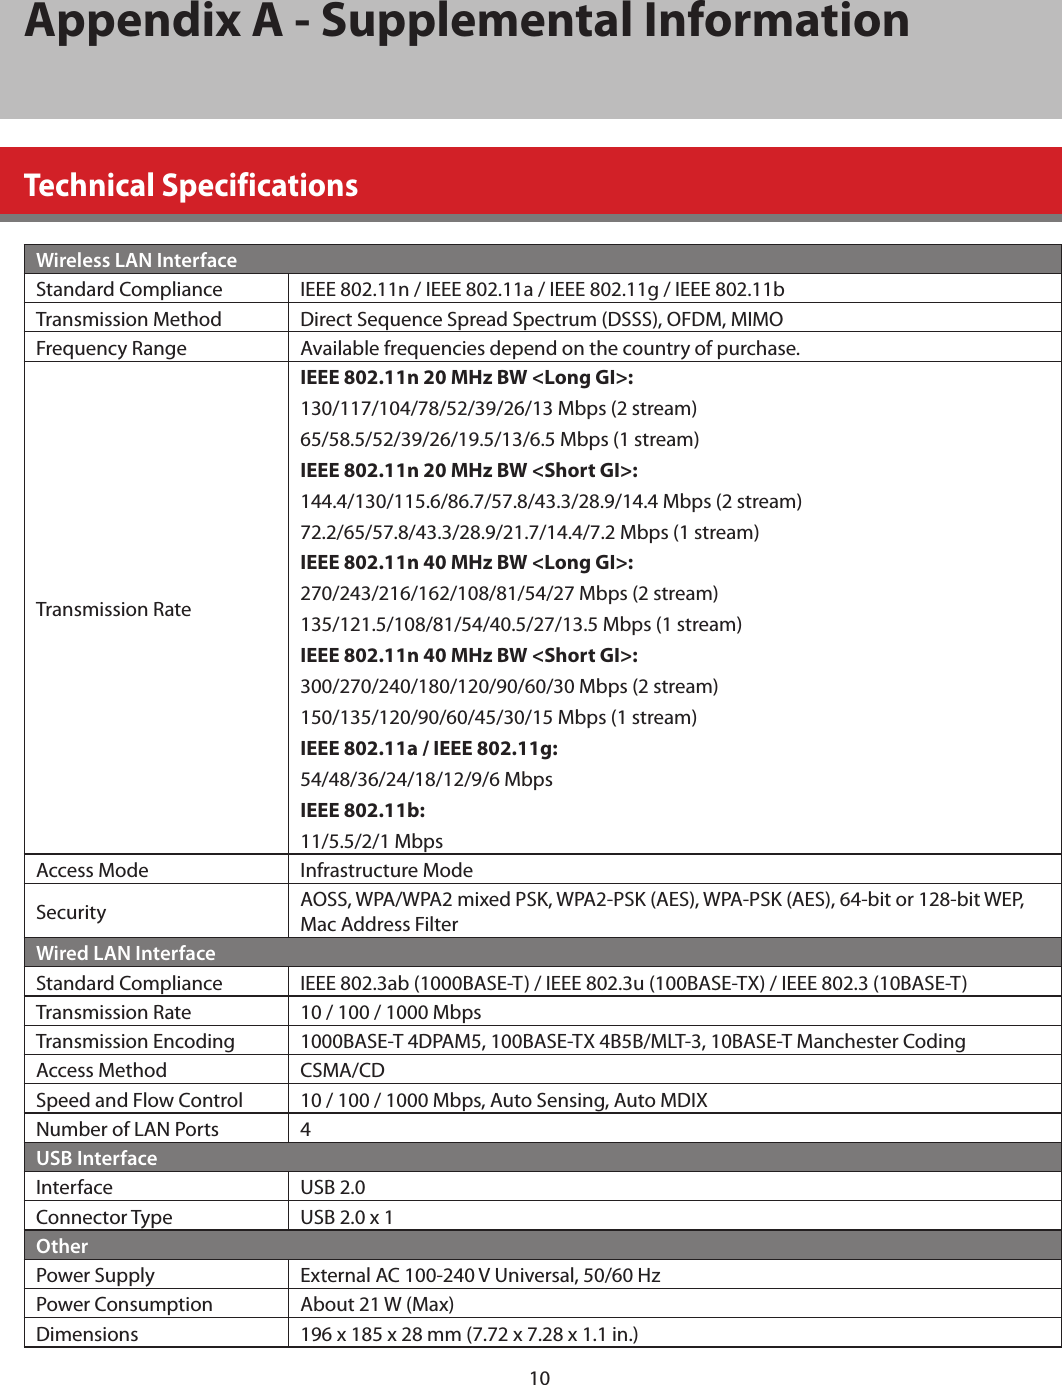 10Appendix A - Supplemental InformationTechnical SpecificationsWireless LAN InterfaceStandard Compliance IEEE 802.11n / IEEE 802.11a / IEEE 802.11g / IEEE 802.11bTransmission Method Direct Sequence Spread Spectrum (DSSS), OFDM, MIMOFrequency Range Available frequencies depend on the country of purchase.Transmission RateIEEE 802.11n 20 MHz BW &lt;Long GI&gt;:130/117/104/78/52/39/26/13 Mbps (2 stream)65/58.5/52/39/26/19.5/13/6.5 Mbps (1 stream)IEEE 802.11n 20 MHz BW &lt;Short GI&gt;:144.4/130/115.6/86.7/57.8/43.3/28.9/14.4 Mbps (2 stream)72.2/65/57.8/43.3/28.9/21.7/14.4/7.2 Mbps (1 stream)IEEE 802.11n 40 MHz BW &lt;Long GI&gt;:270/243/216/162/108/81/54/27 Mbps (2 stream)135/121.5/108/81/54/40.5/27/13.5 Mbps (1 stream)IEEE 802.11n 40 MHz BW &lt;Short GI&gt;:300/270/240/180/120/90/60/30 Mbps (2 stream)150/135/120/90/60/45/30/15 Mbps (1 stream)IEEE 802.11a / IEEE 802.11g:54/48/36/24/18/12/9/6 MbpsIEEE 802.11b:11/5.5/2/1 MbpsAccess Mode Infrastructure ModeSecurity AOSS, WPA/WPA2 mixed PSK, WPA2-PSK (AES), WPA-PSK (AES), 64-bit or 128-bit WEP, Mac Address FilterWired LAN InterfaceStandard Compliance IEEE 802.3ab (1000BASE-T) / IEEE 802.3u (100BASE-TX) / IEEE 802.3 (10BASE-T)Transmission Rate 10 / 100 / 1000 MbpsTransmission Encoding 1000BASE-T 4DPAM5, 100BASE-TX 4B5B/MLT-3, 10BASE-T Manchester CodingAccess Method CSMA/CDSpeed and Flow Control 10 / 100 / 1000 Mbps, Auto Sensing, Auto MDIXNumber of LAN Ports 4USB InterfaceInterface USB 2.0Connector Type USB 2.0 x 1OtherPower Supply External AC 100-240 V Universal, 50/60 HzPower Consumption About 21 W (Max)Dimensions 196 x 185 x 28 mm (7.72 x 7.28 x 1.1 in.)